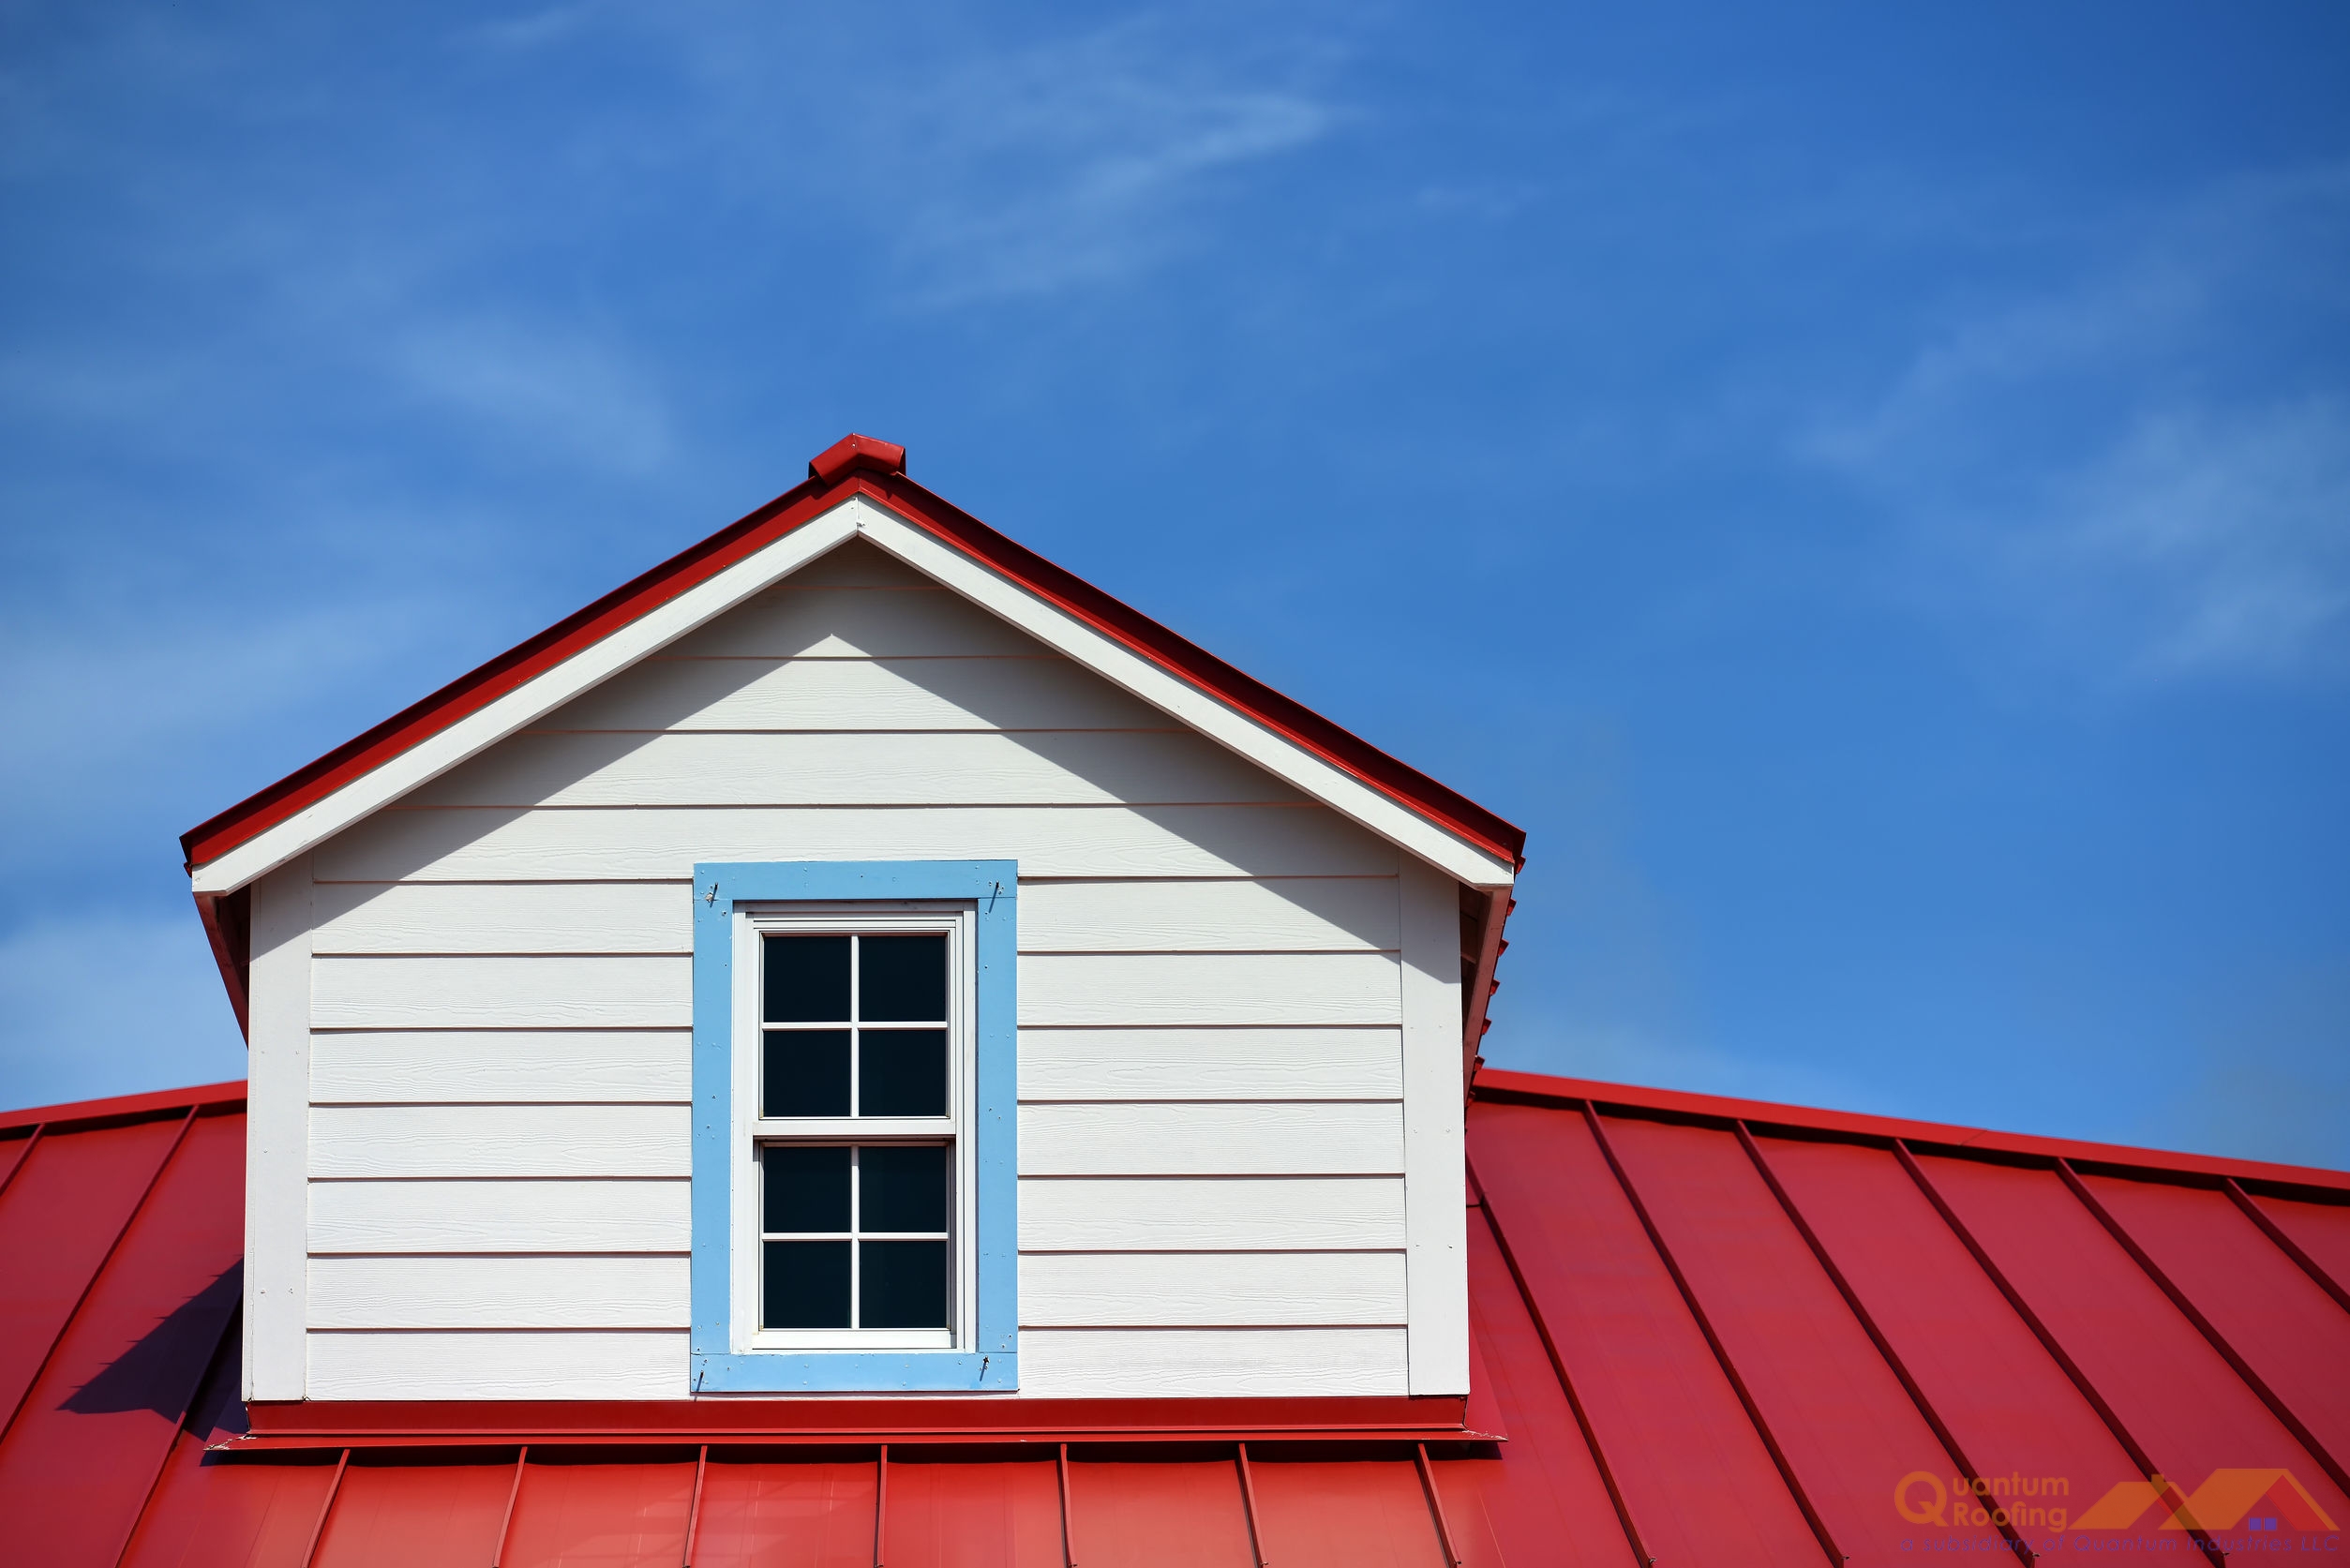 What Is A Standing Seam Metal Roof?